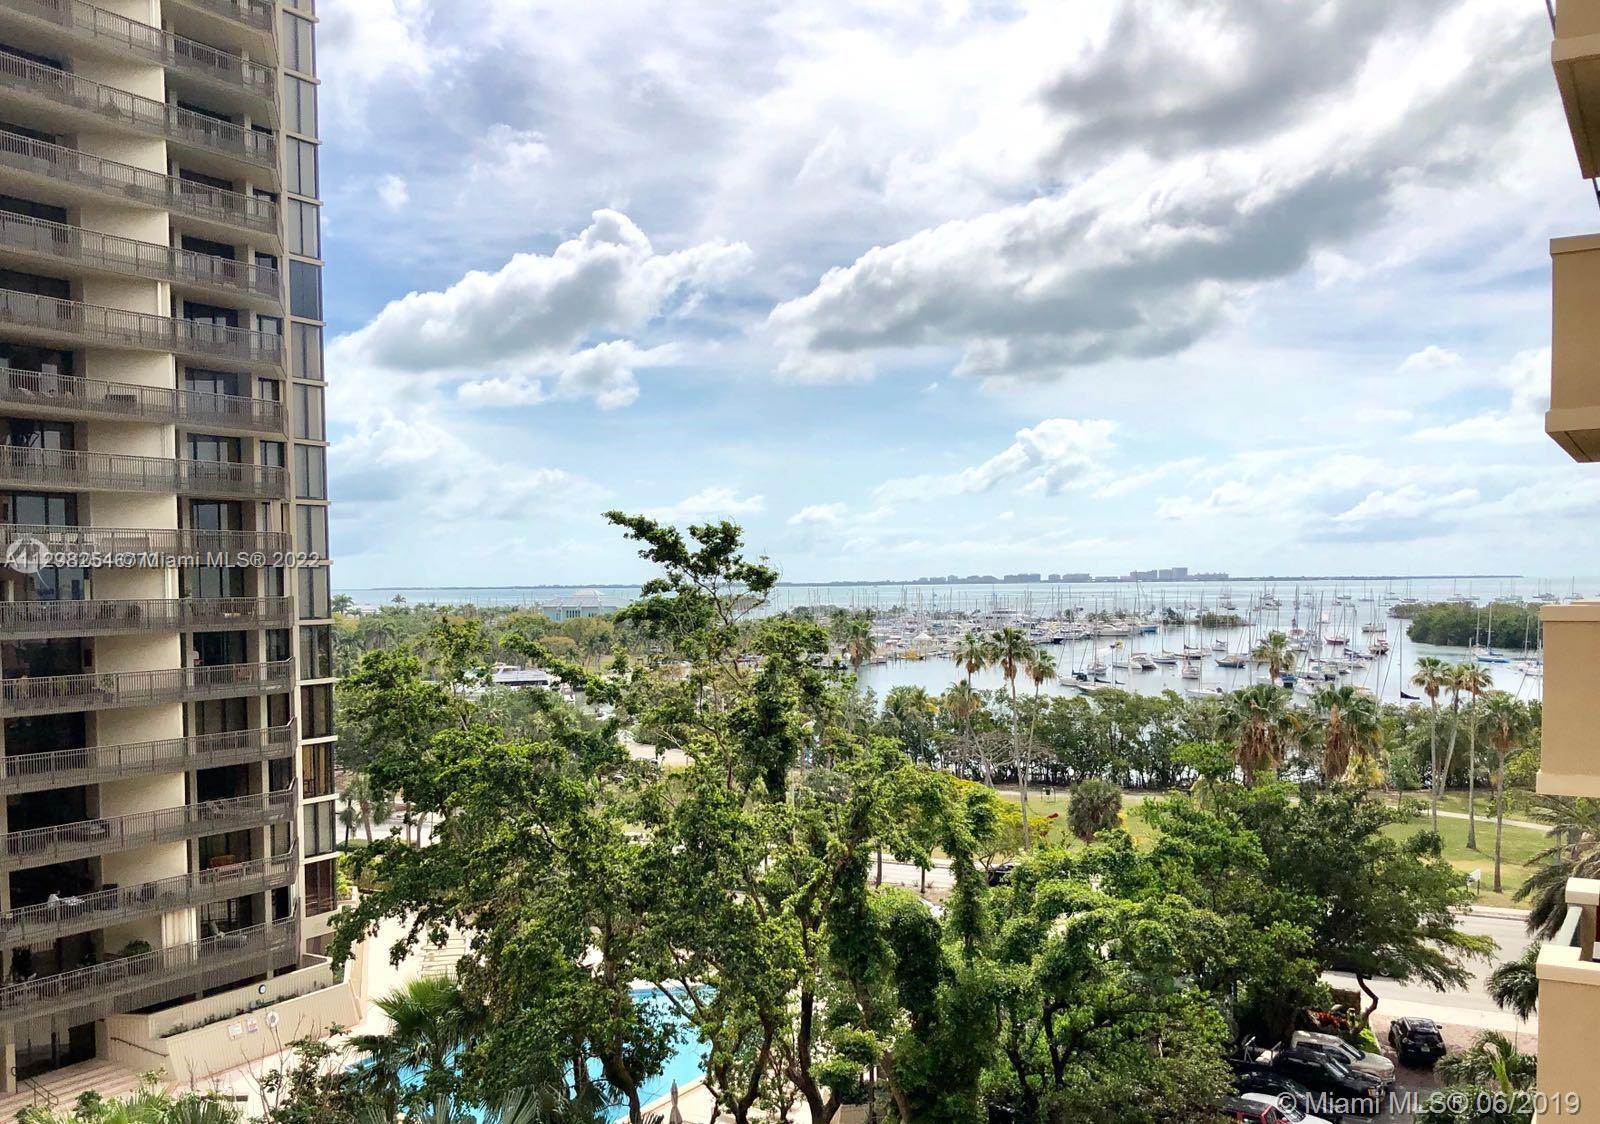 BEAUTIFULL FURNISHED 1/1 IN THE HEART OF COCONUTUT GROVE, WALKING DISTANCE TO THE NEW AMAIZING COCONUT GROVE WITH RESTAURANTS, BEAUTIFULL SHOPS AND 15 MIN TO THE AIRPORT, BEACHES AND DOWNTOWN. PROPERTY CAN BE RENTED ANYTIME IN A YEAR, NO RESTRICTIONS.